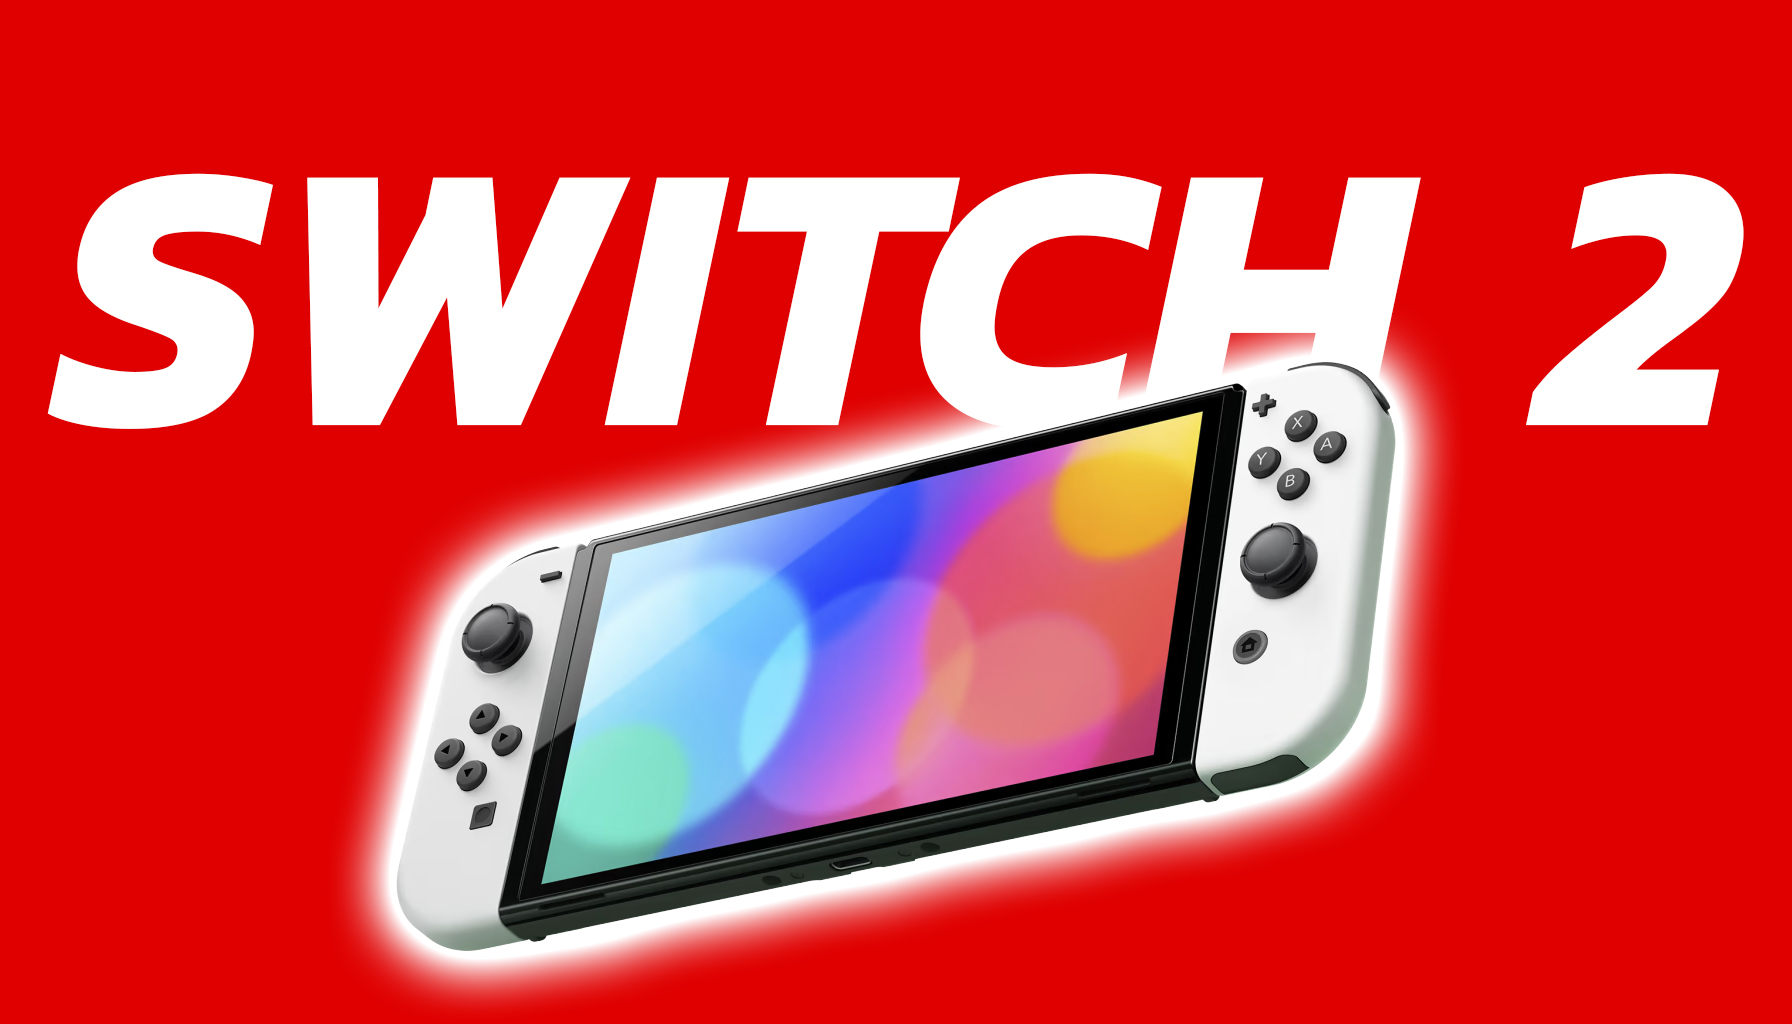 Nintendo Switch 2: Nintendo Switch 2: Here's everything we know